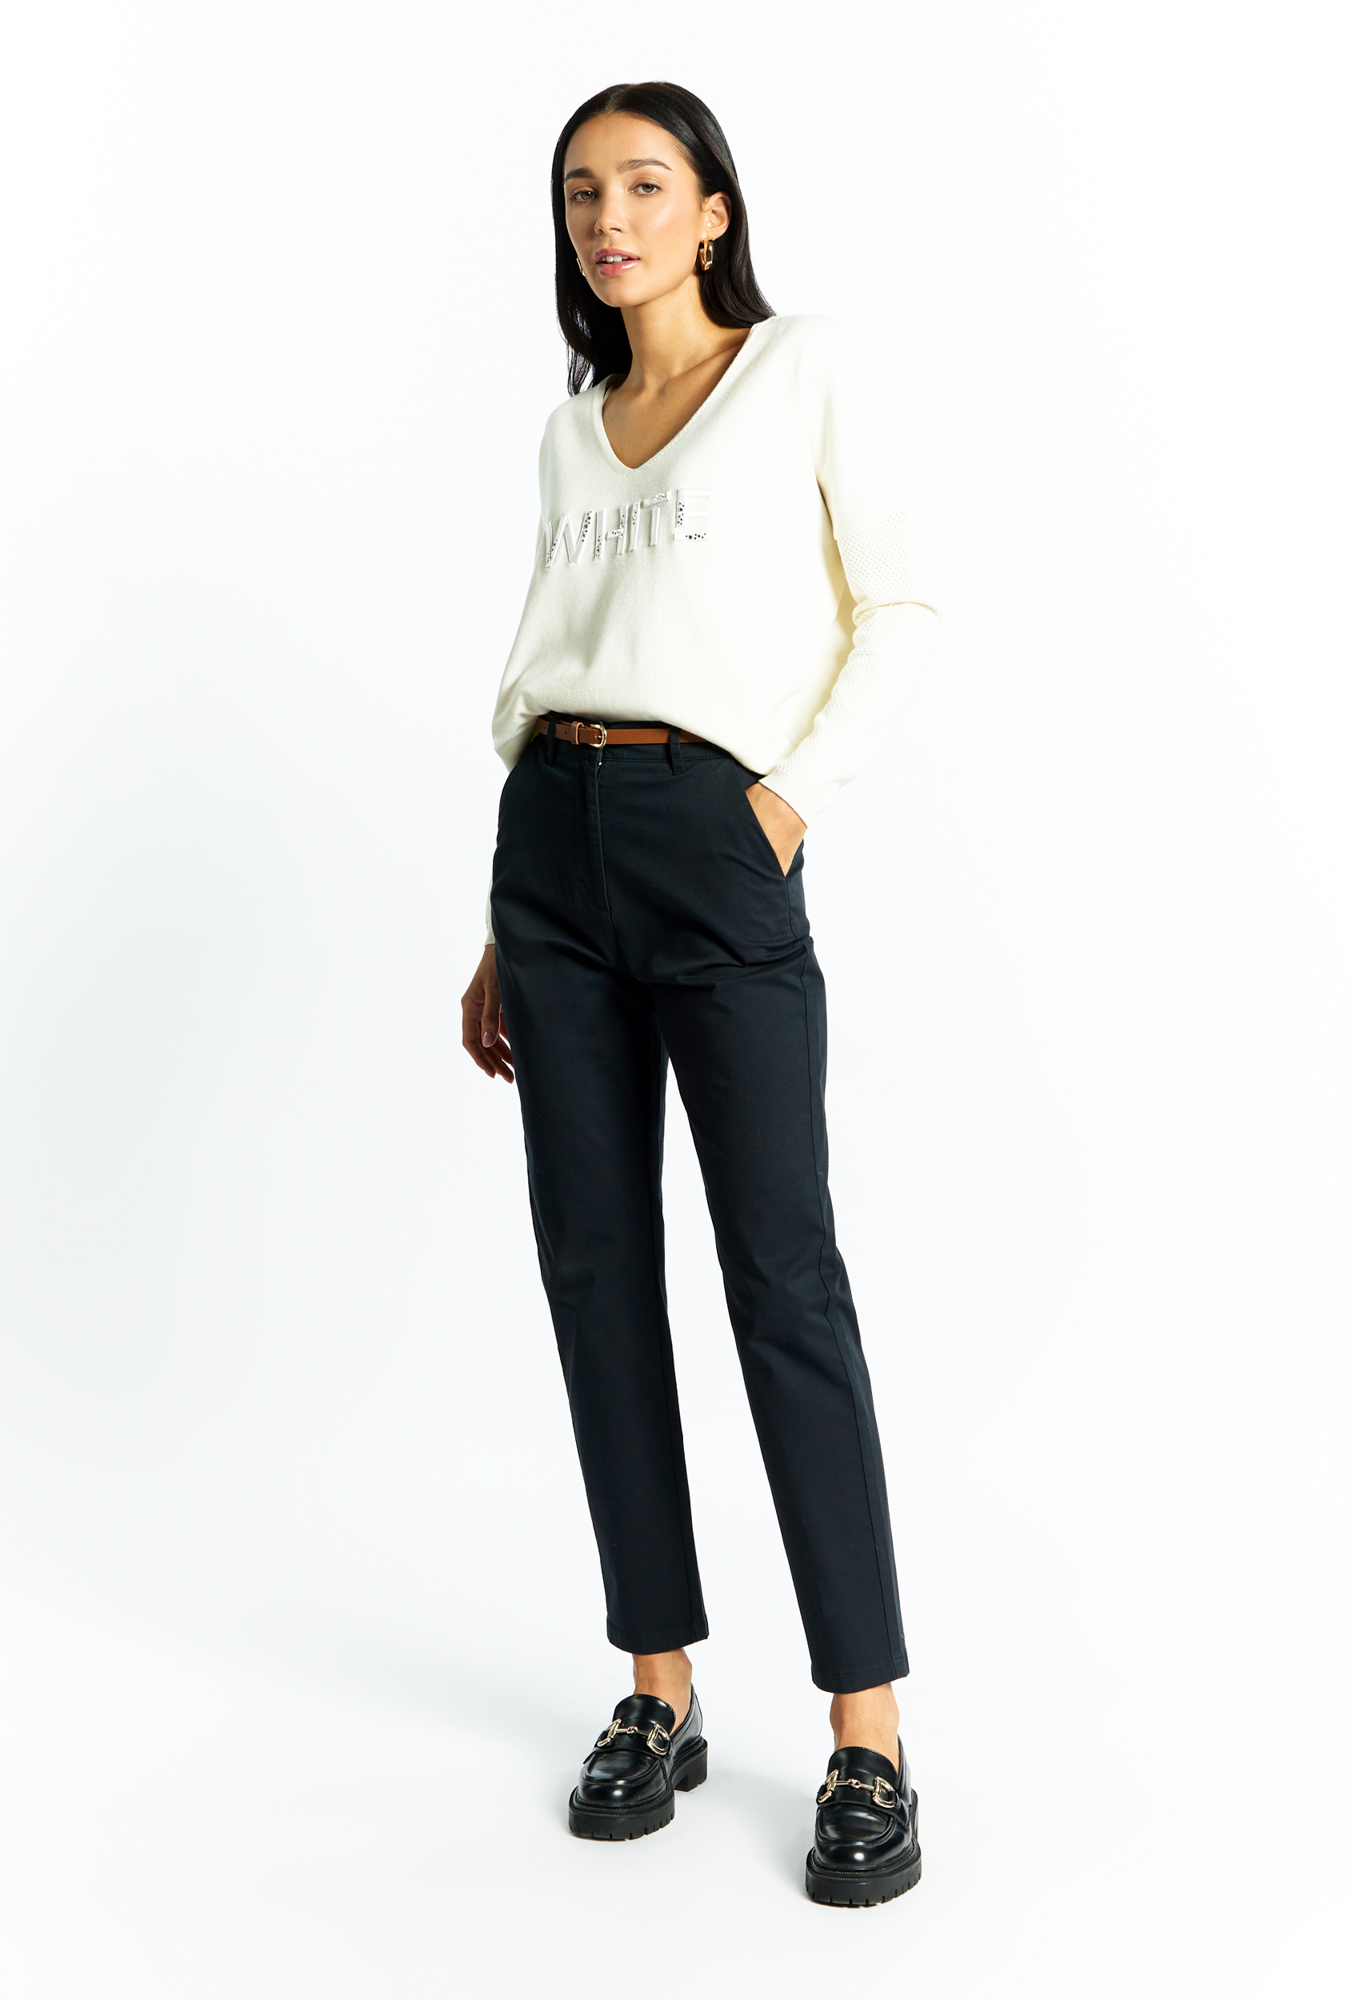 MONNARI Woman's Trousers Fabric Trousers With Belt Navy Blue